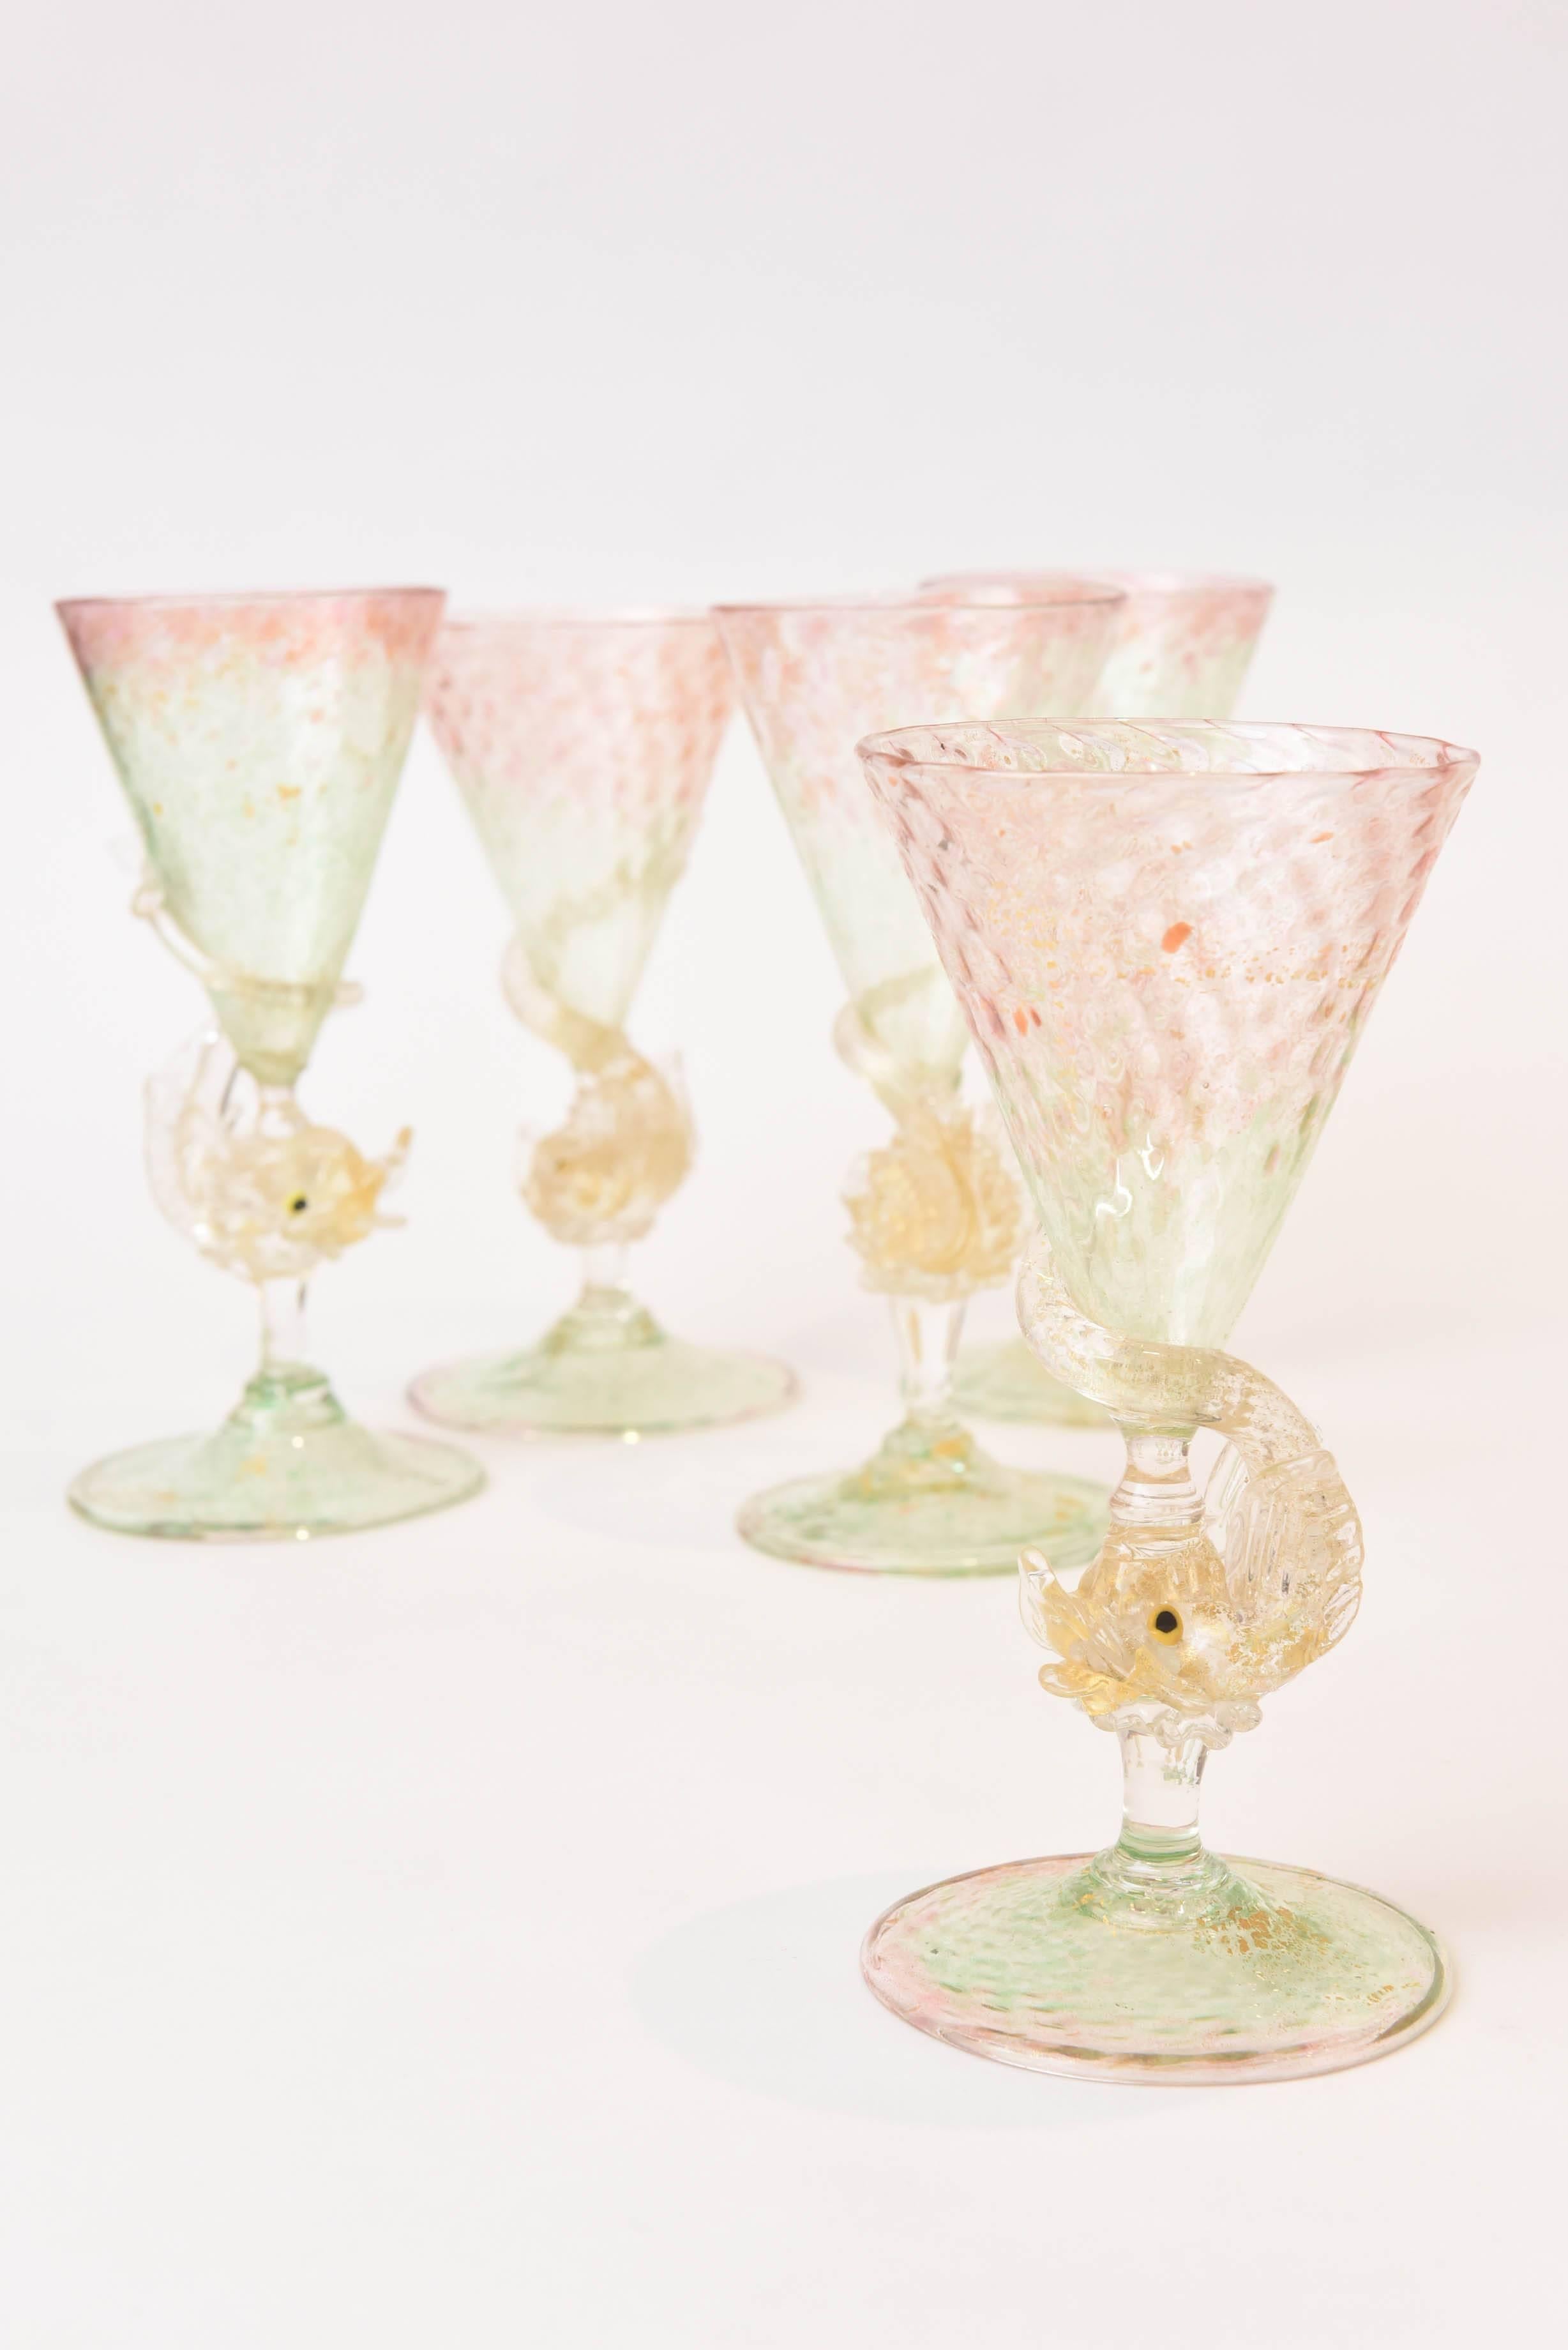 Antique Venetian Goblets, Pink-Green with Dolphin Figural Stems. Sold Individual 2